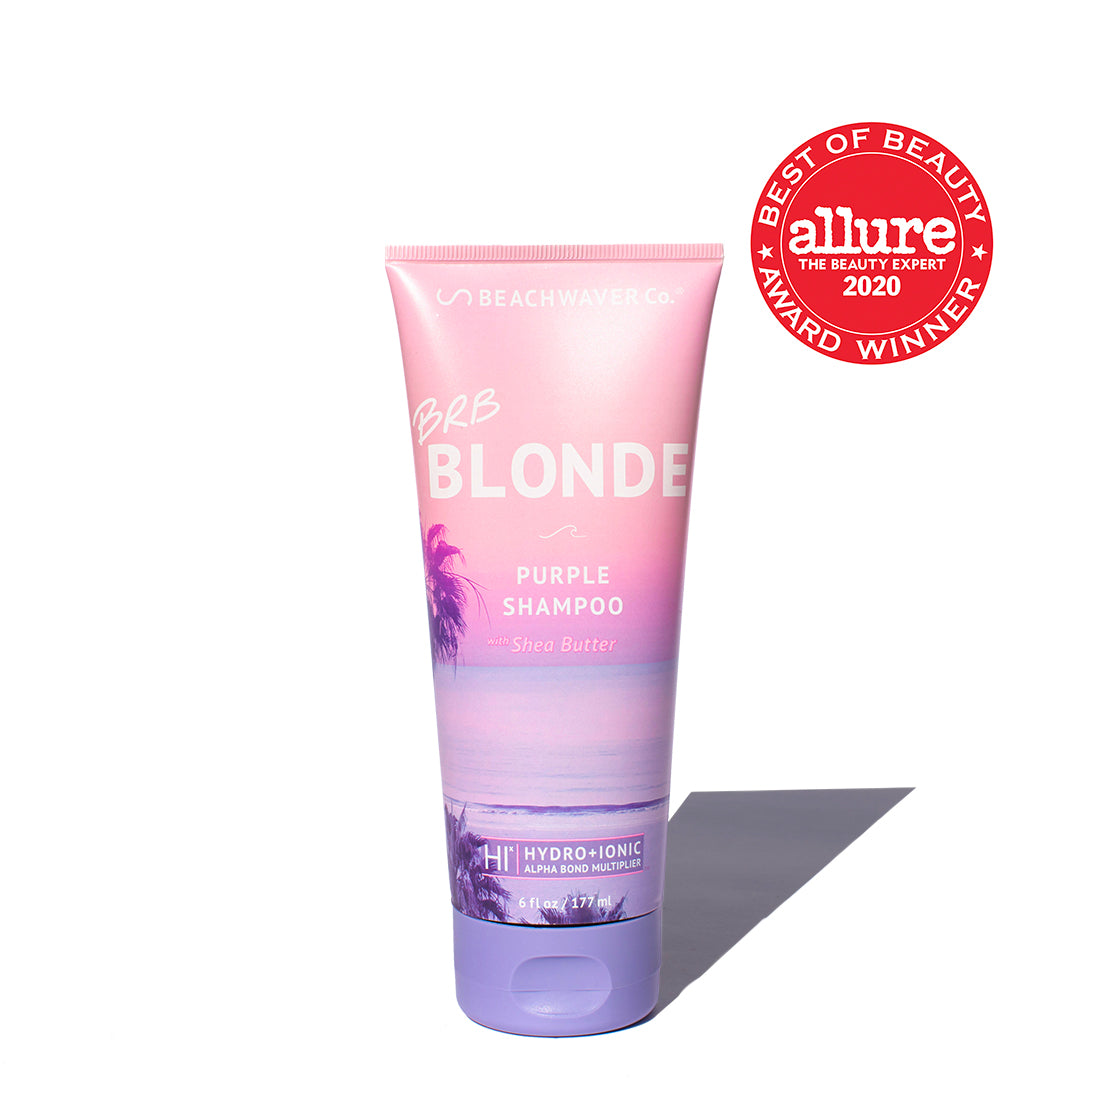 Photo of Beachwavers BRB Blonde Purple Shampoo with the "Allure Best of Beauty" stamp on it.